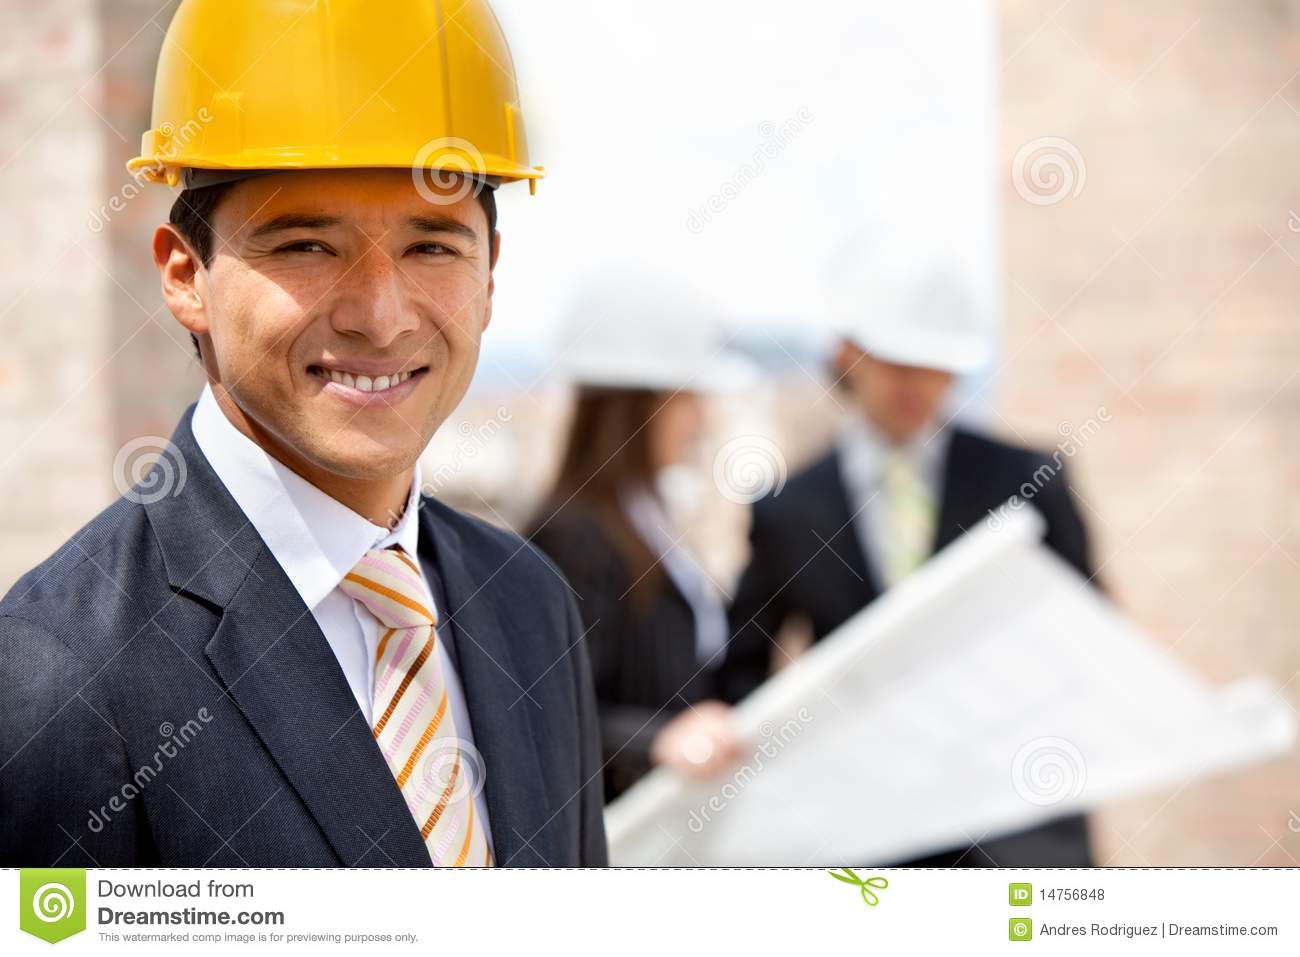 Male Engineer At A Construction Site Royalty Free Stock Photos   Image    